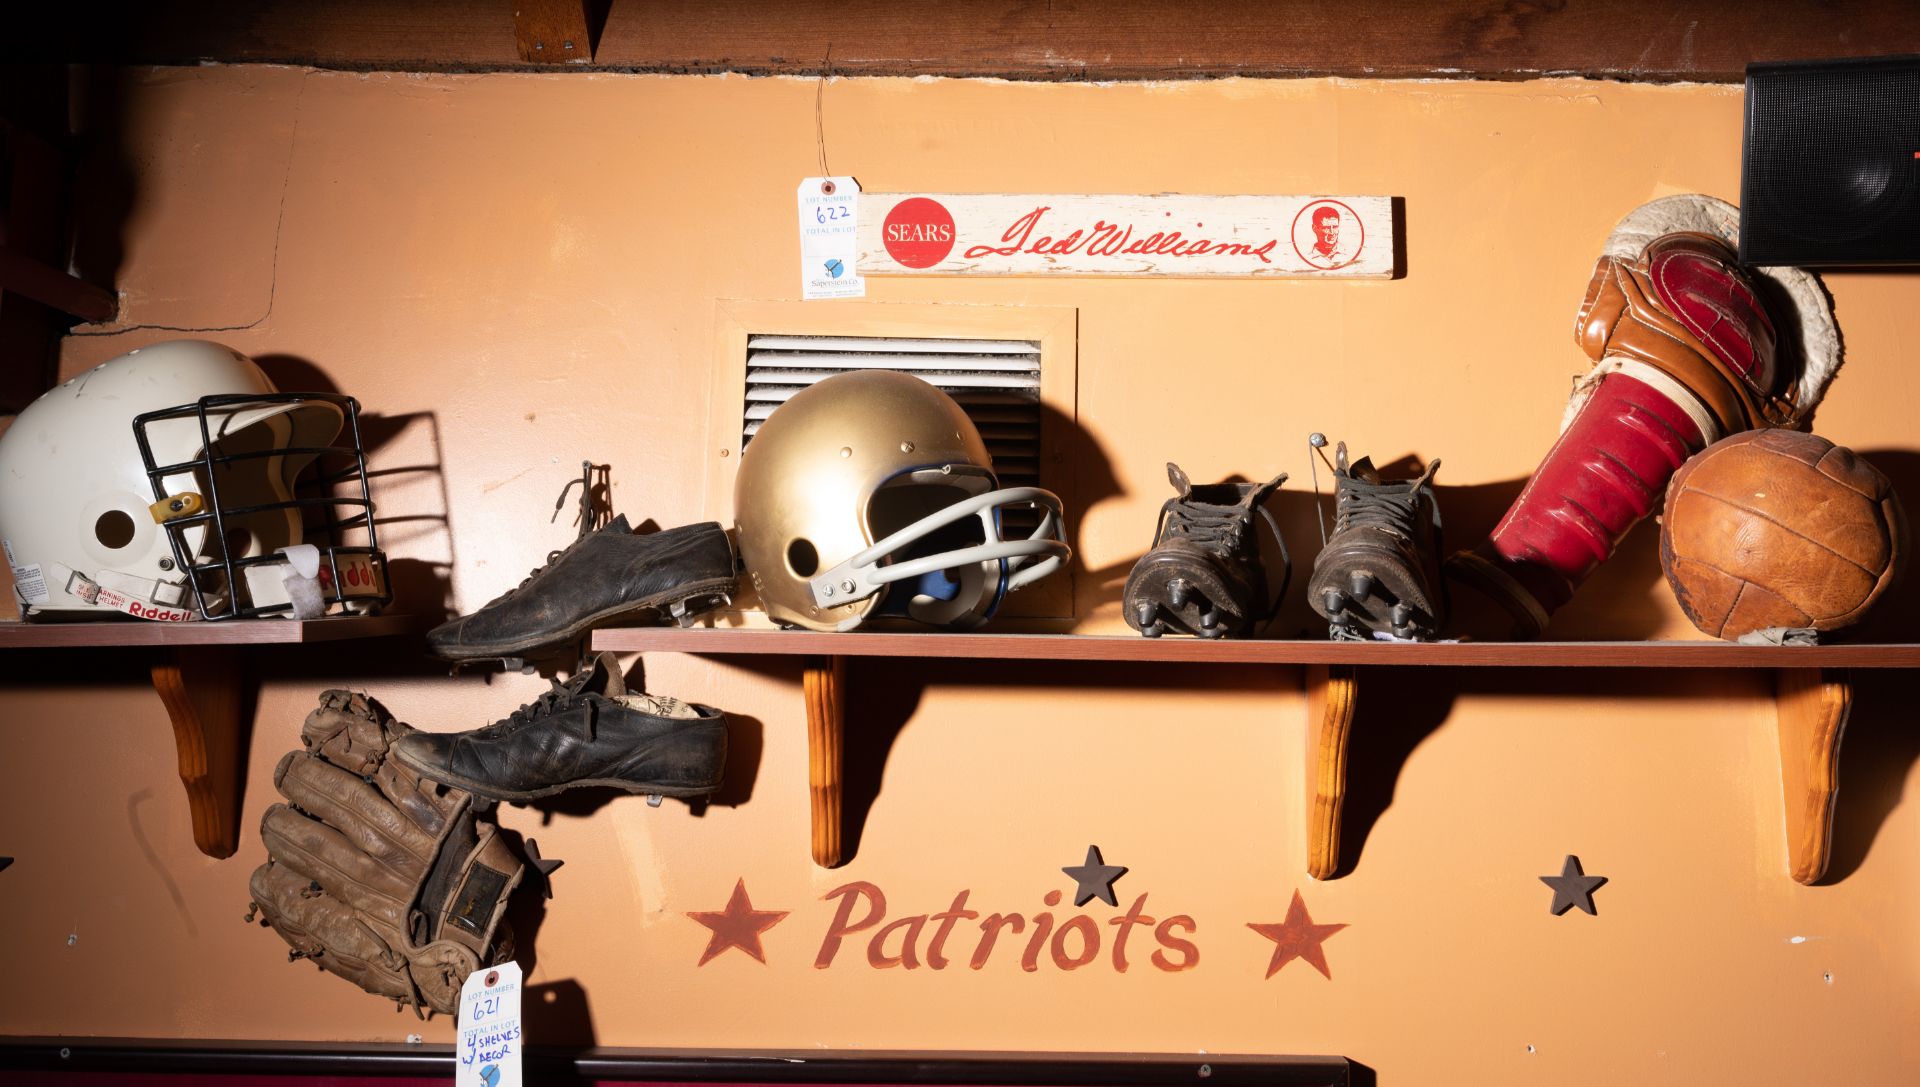 (4) Wood Shelves with Vintage Sporting Décor C/o" Helmets, Cleats , Mitts, Shelves, Etc.